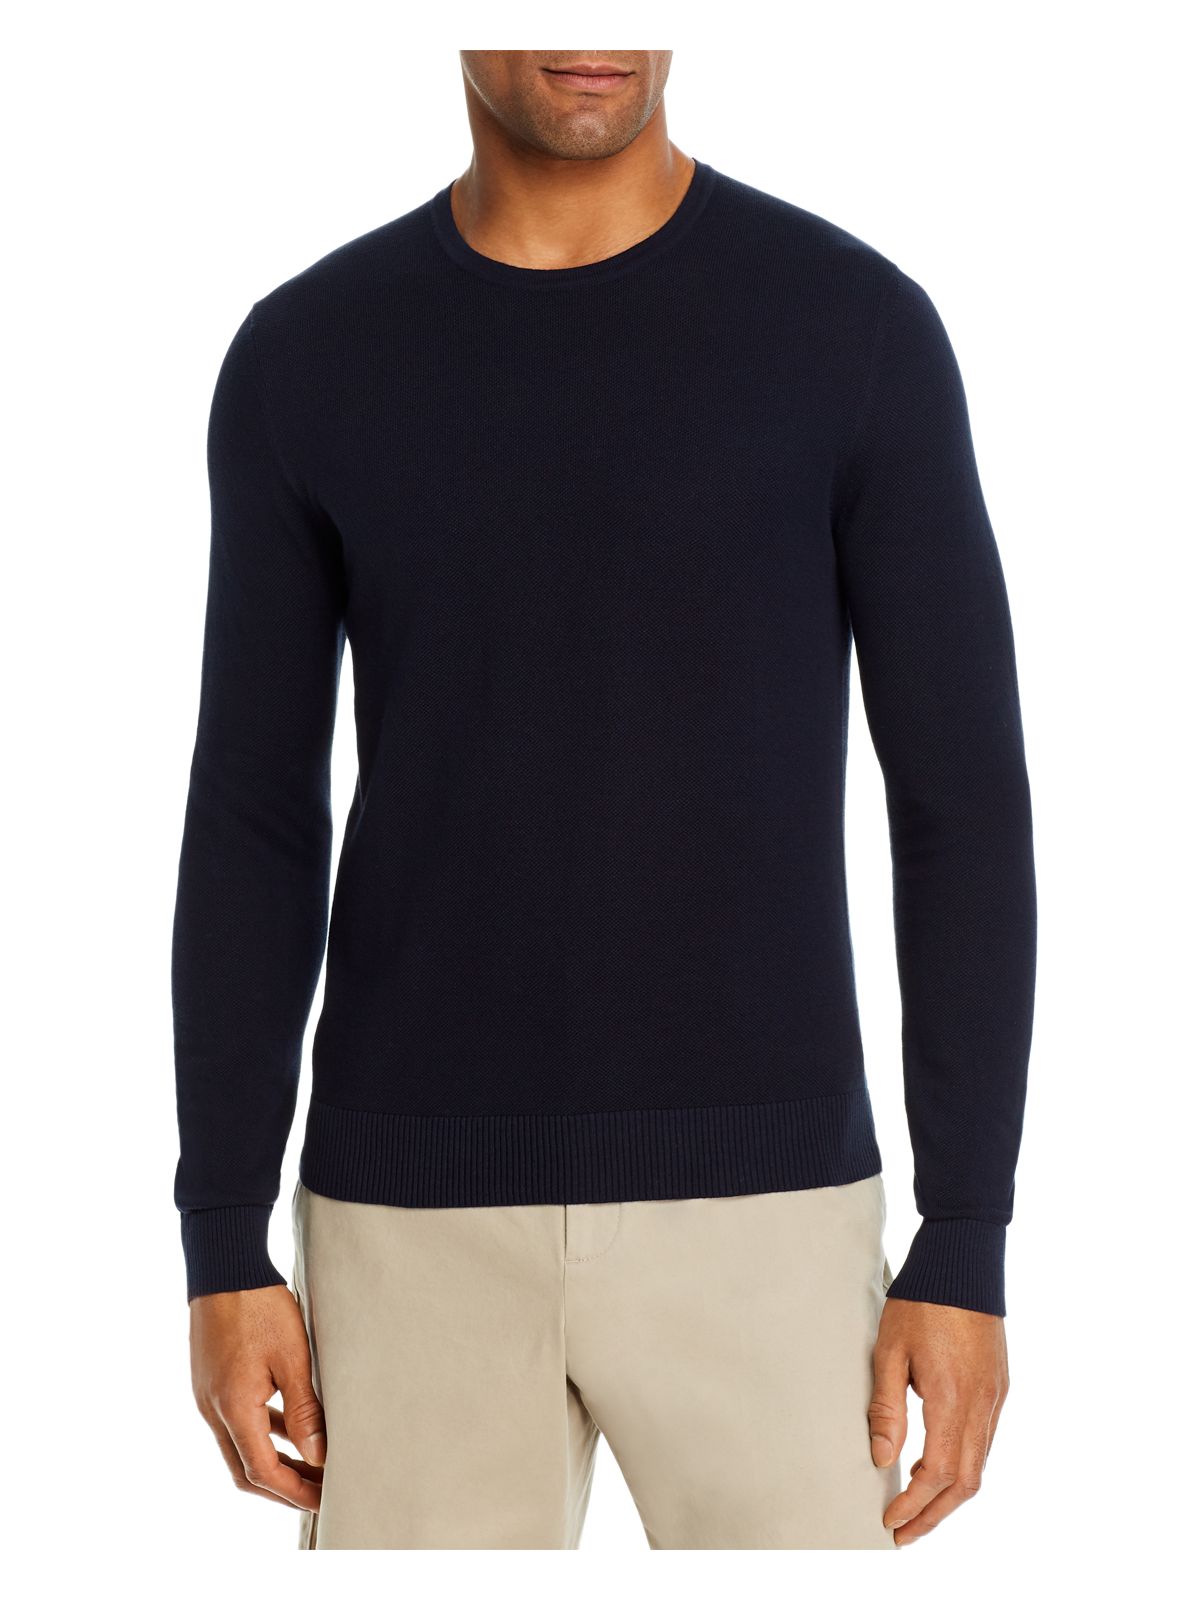 DYLAN GRAY Mens Navy Long Sleeve Crew Neck Classic Fit Sweater S